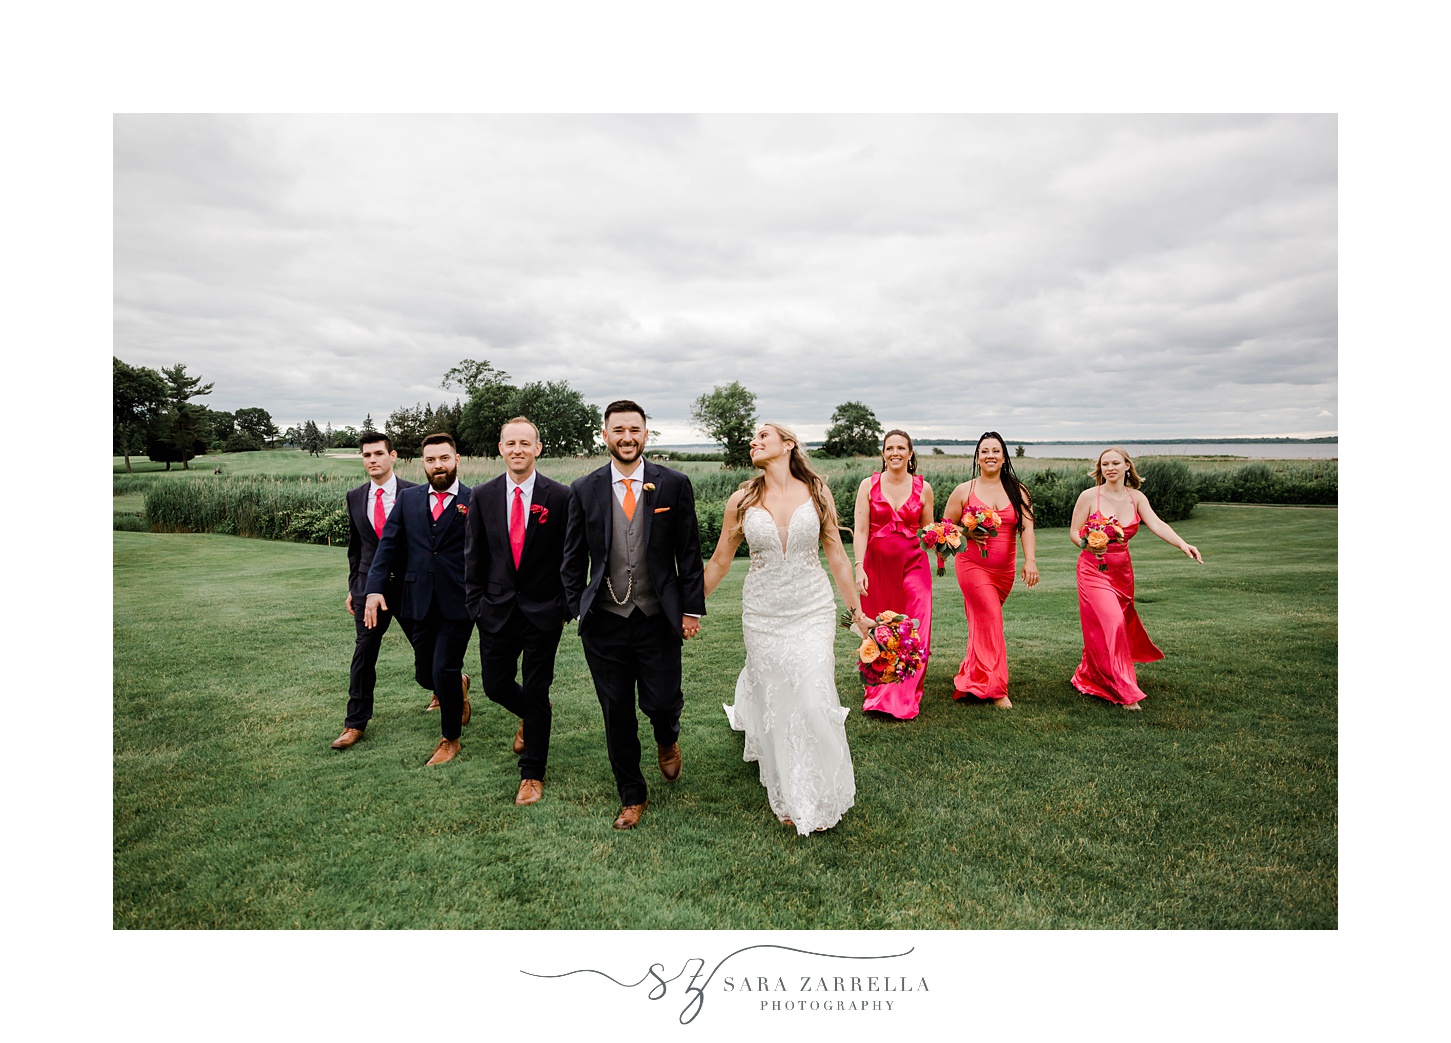 bride and groom laugh walking with bridesmaids in pink gowns and groomsmen in black suits 